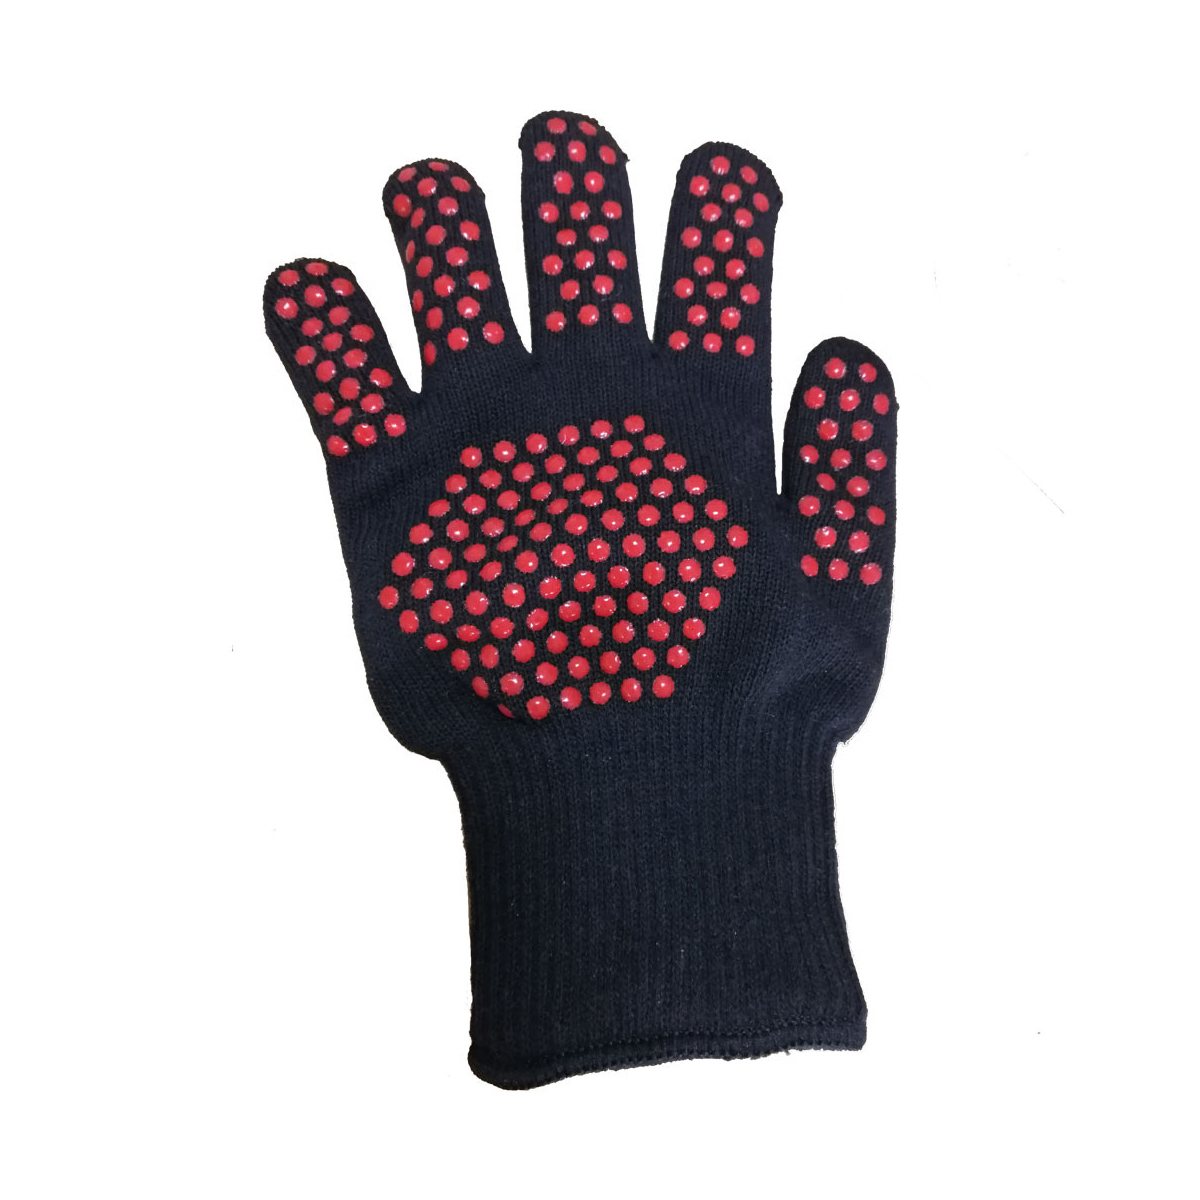 1PC-Extreme-Heat-Resistant-Kitchen-Oven-Mitts-Multi-Purpose-Barbecue-BBQ-Gloves-Anti-Cutting-Cooking-1651519-5